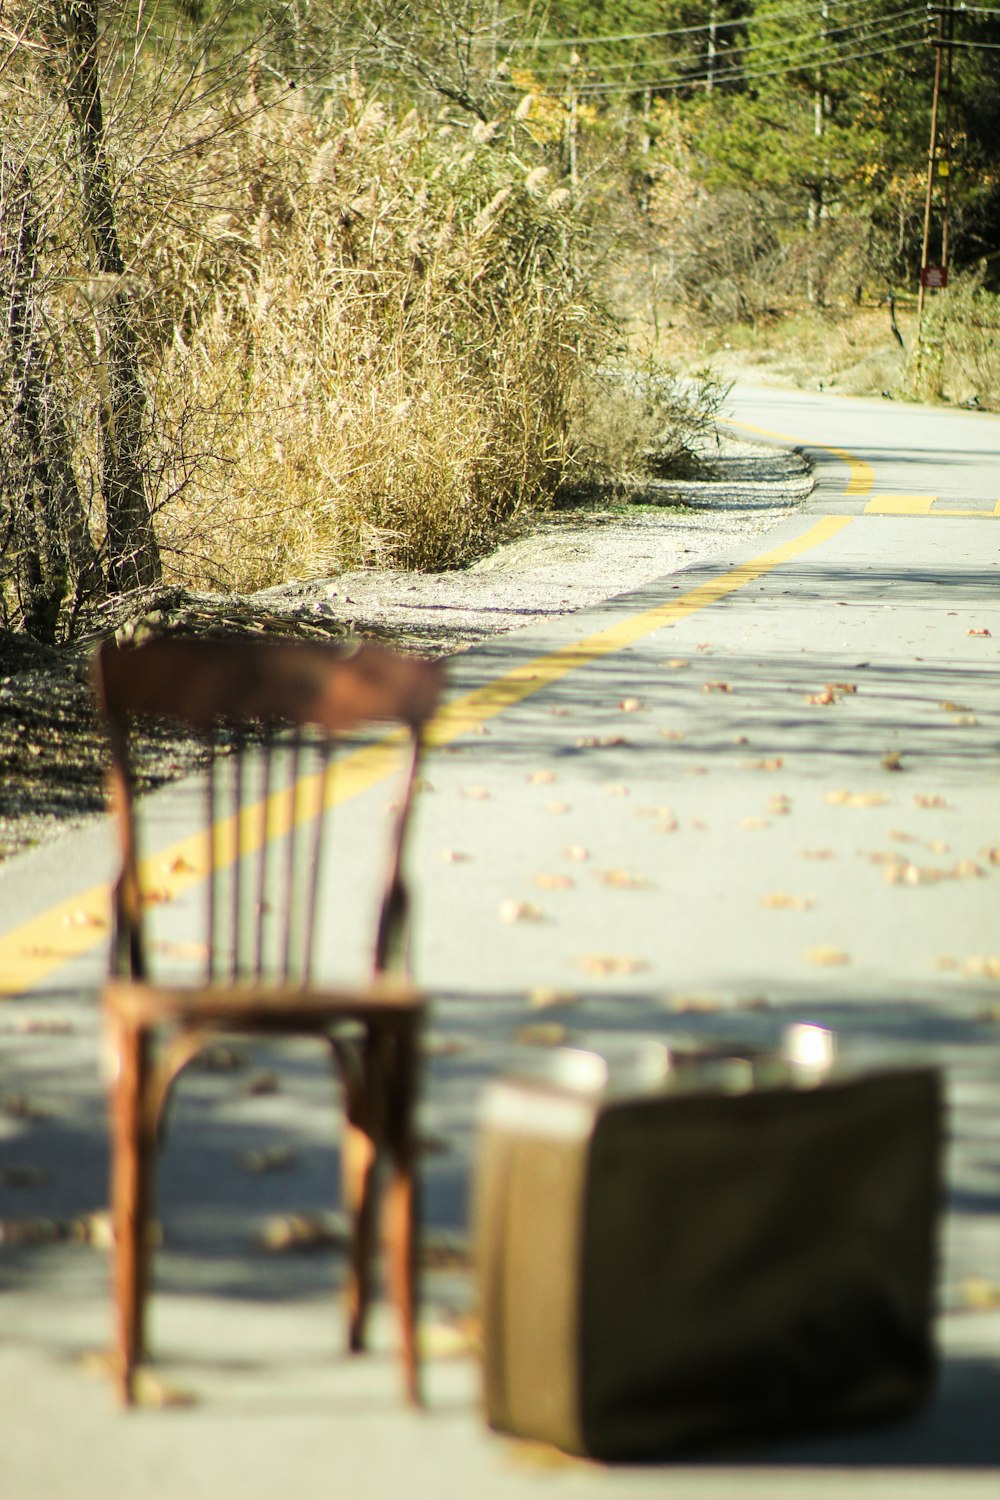 a chair sitting on the side of a road next to a suitcase